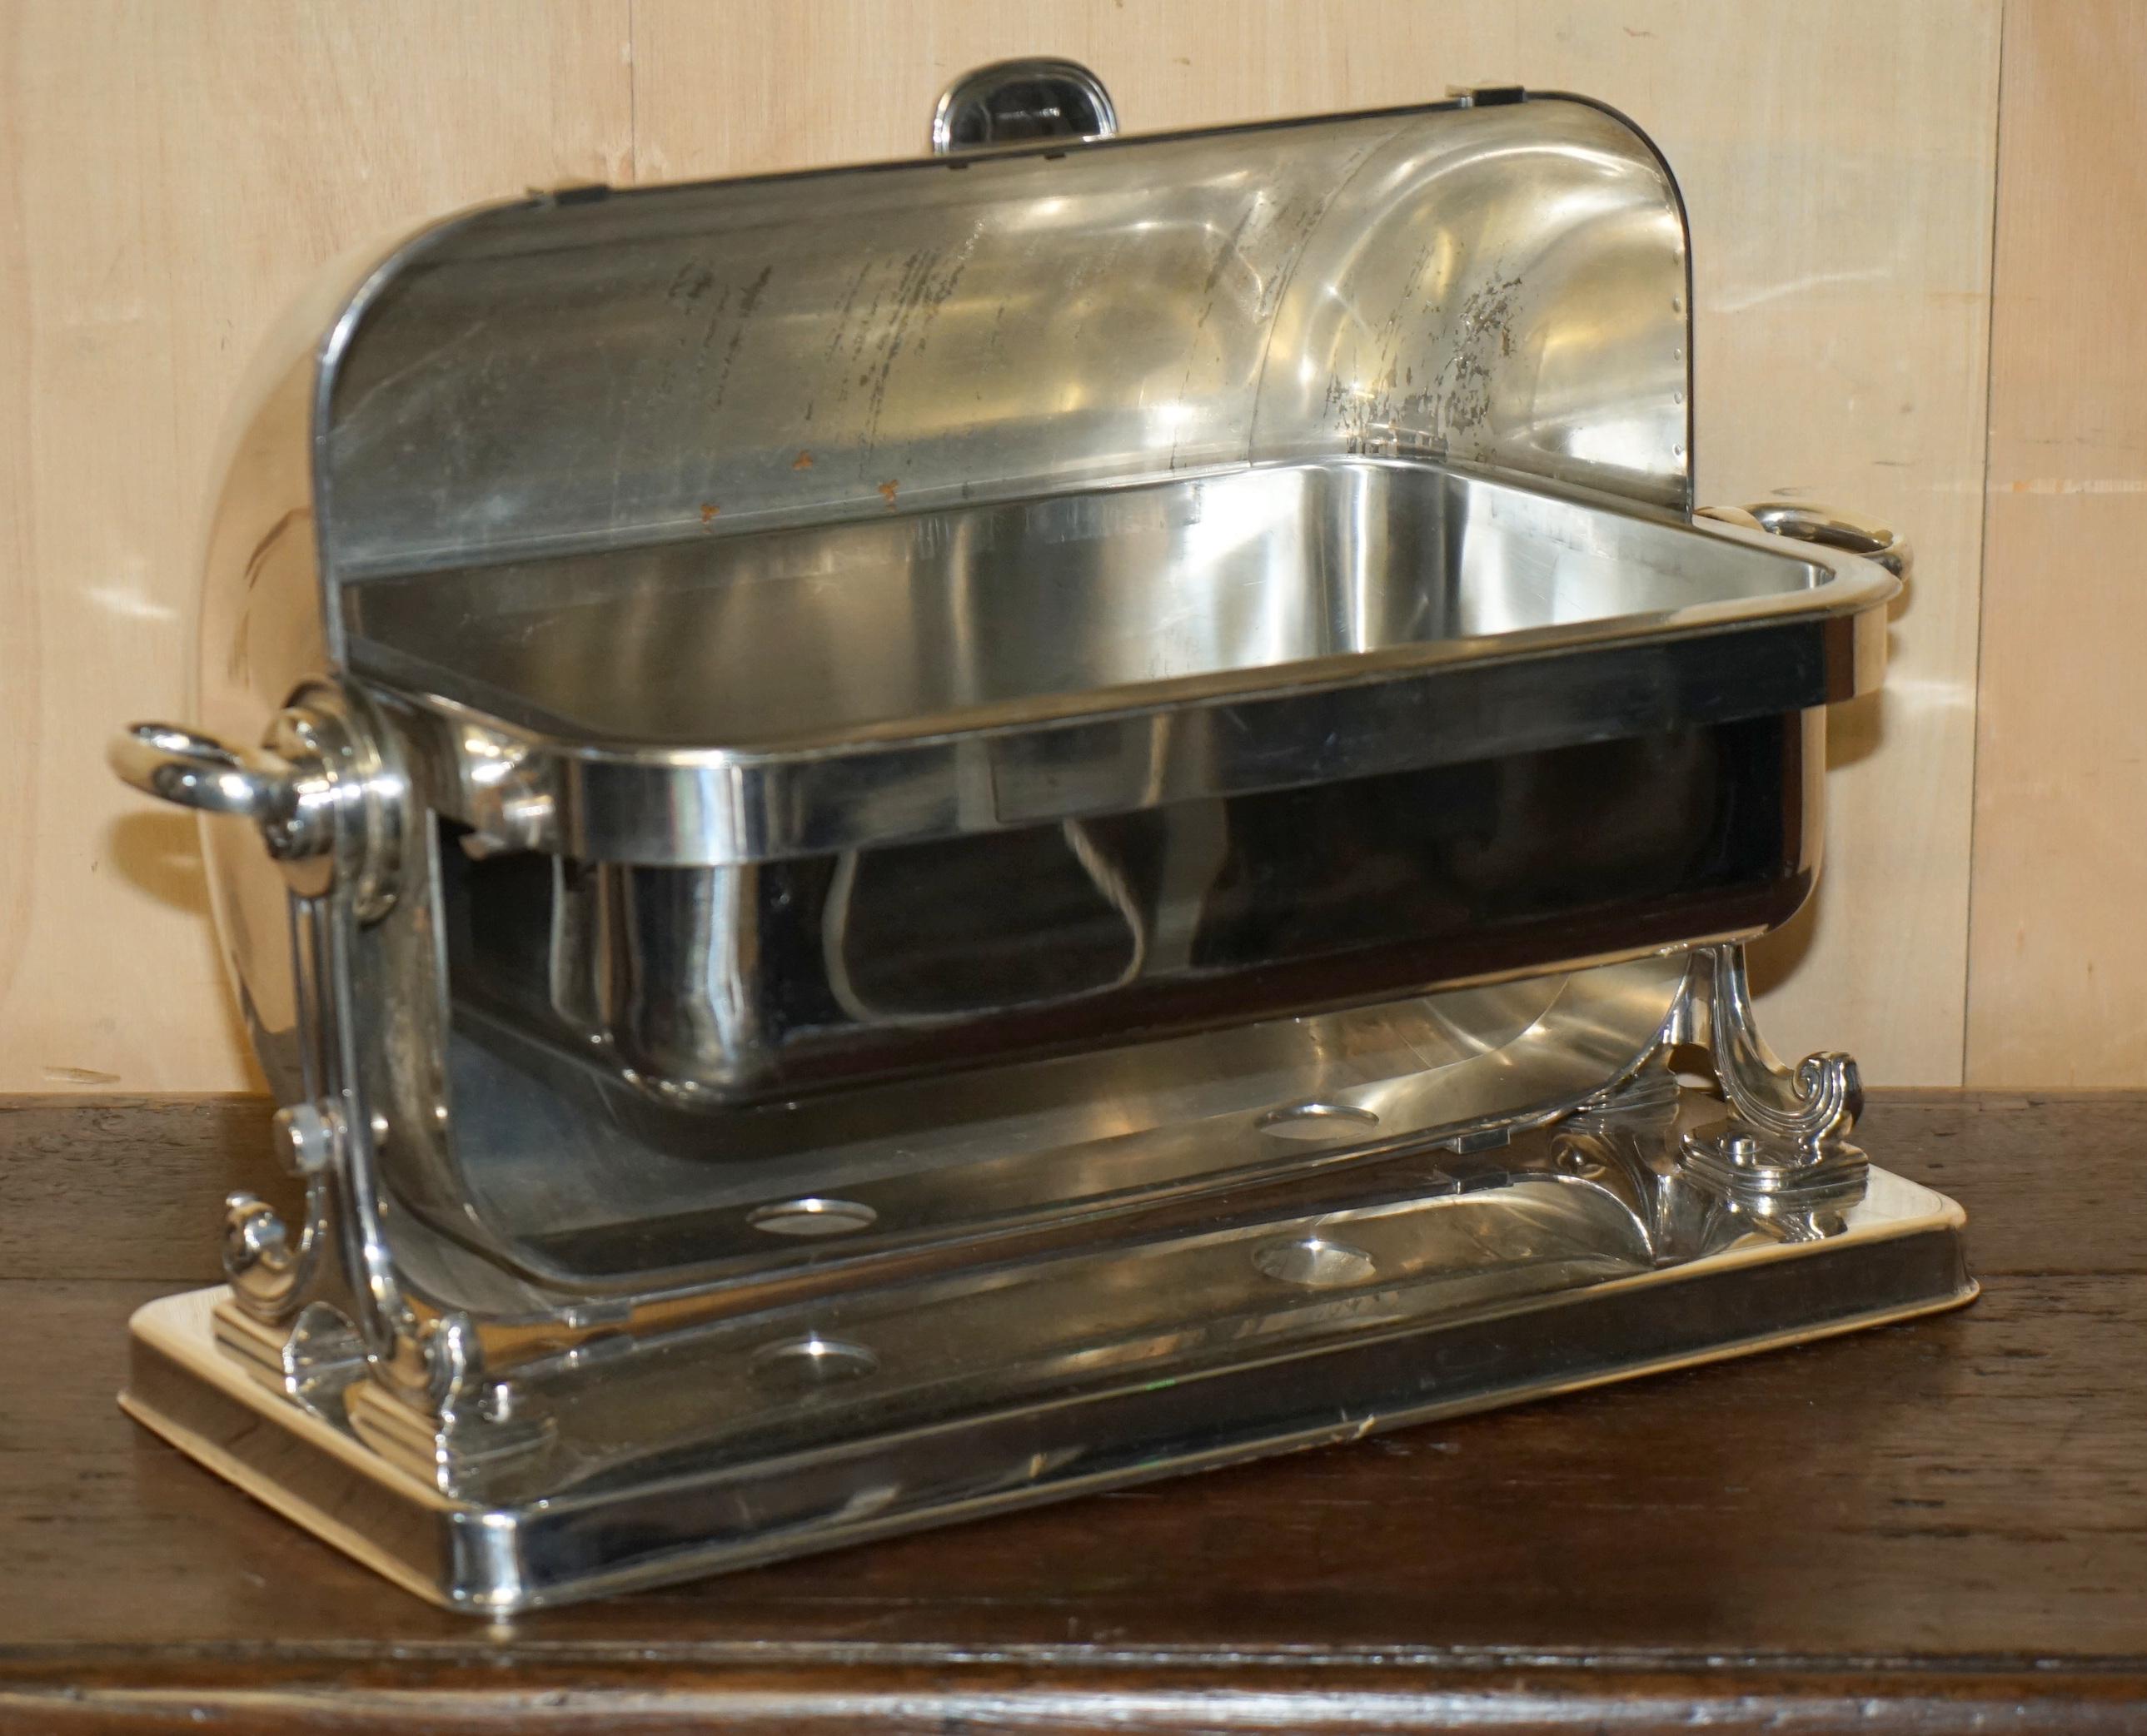 STUNNING VINTAGE CiRCA 1960 ITALIAN CHAFING DISH MEAT SERVER BY SABONET STAMPED For Sale 5